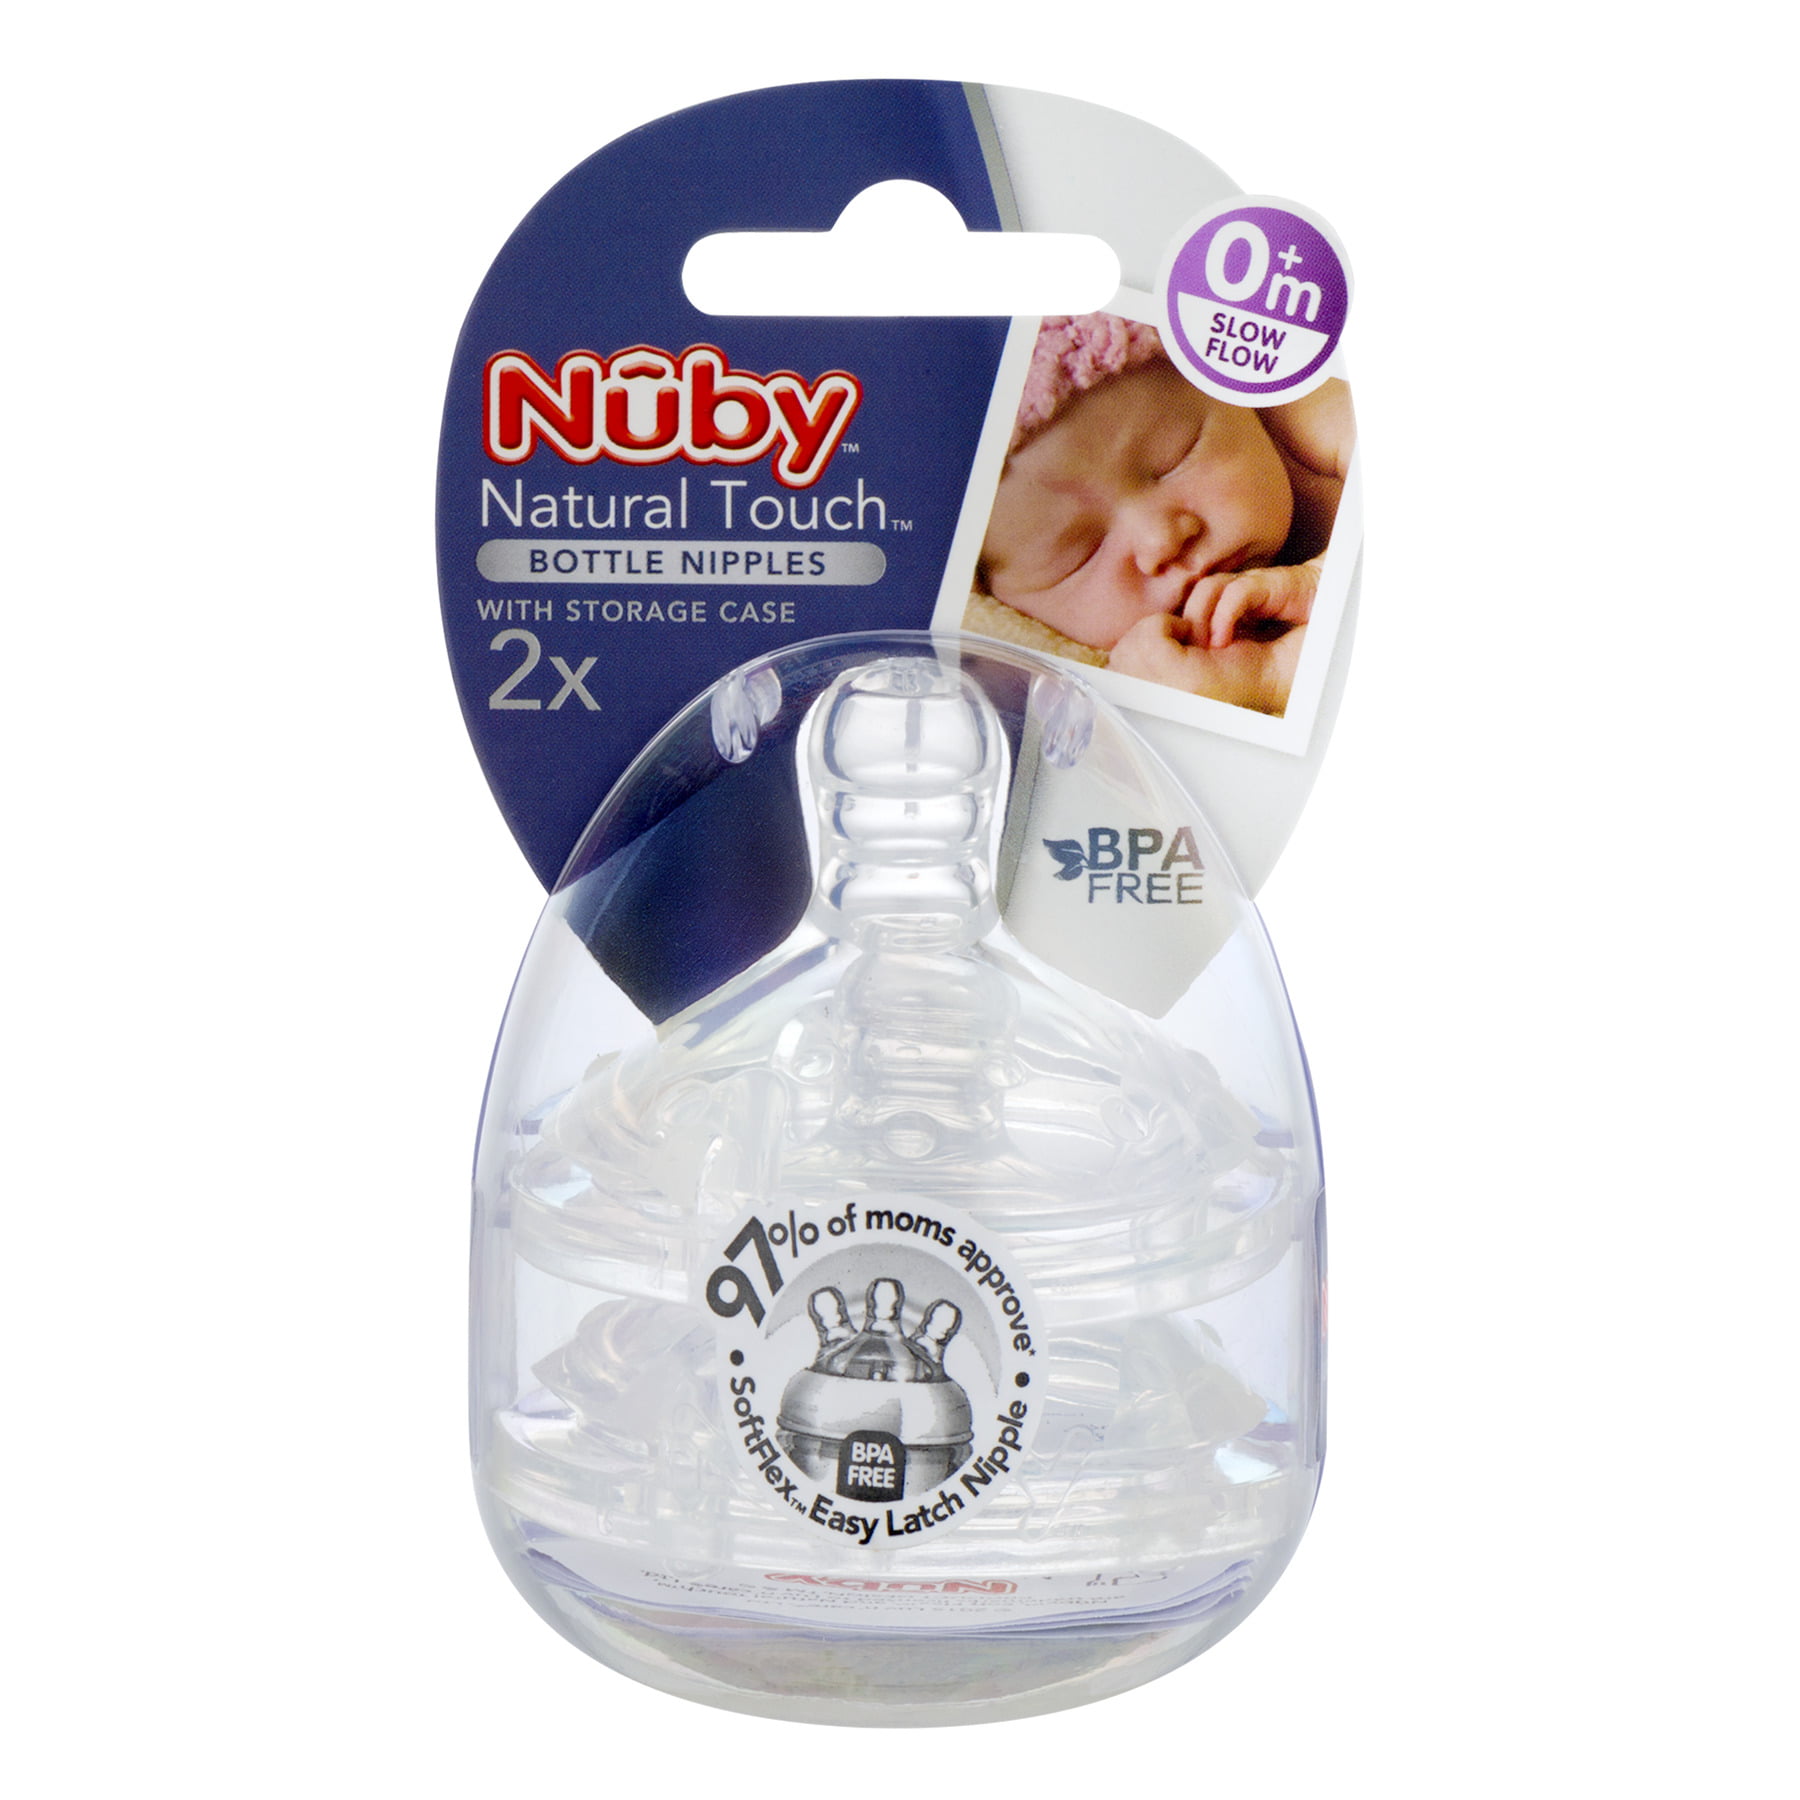 Fast Flow Nipple 0m Nuby Natural Touch Breast Size Nipple 2 Pack New 